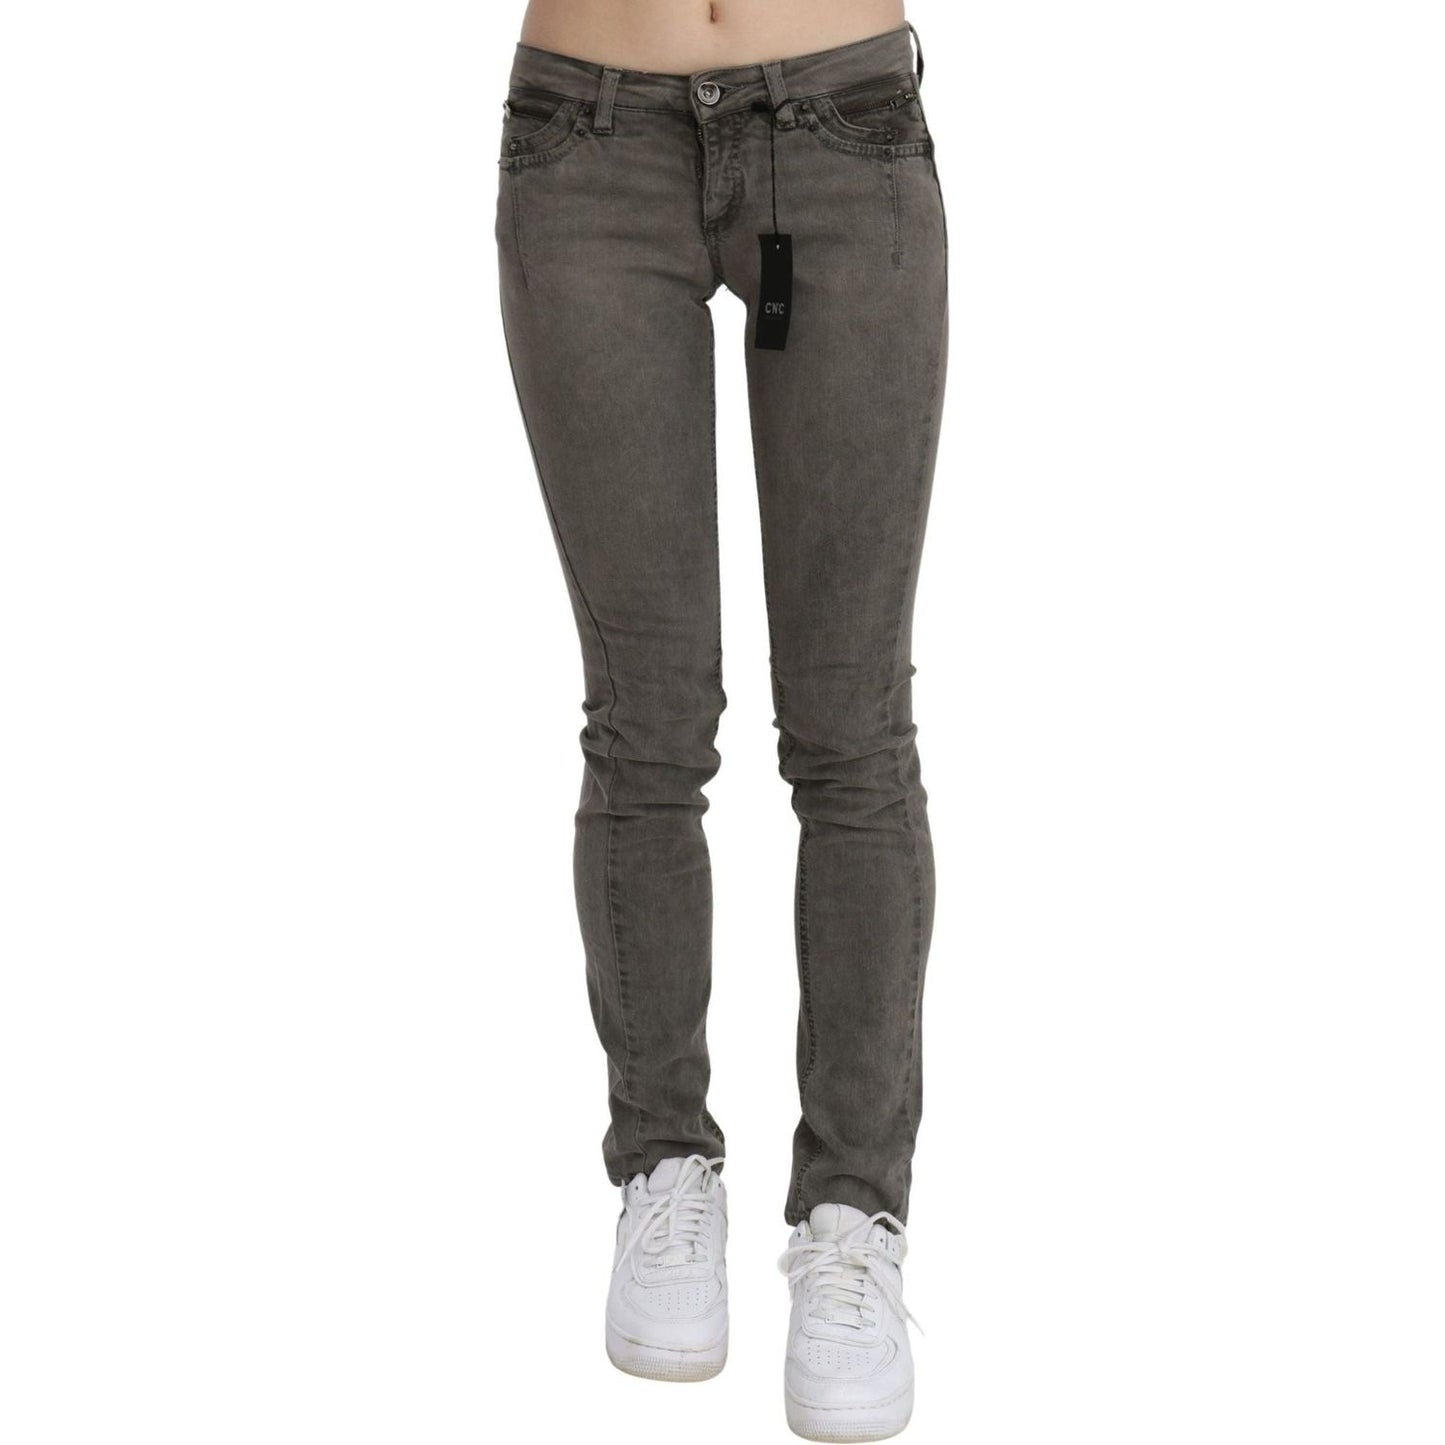 Costume National Chic Gray Slim Fit Cotton Jeans gray-low-waist-skinny-denim-cotton-jeans